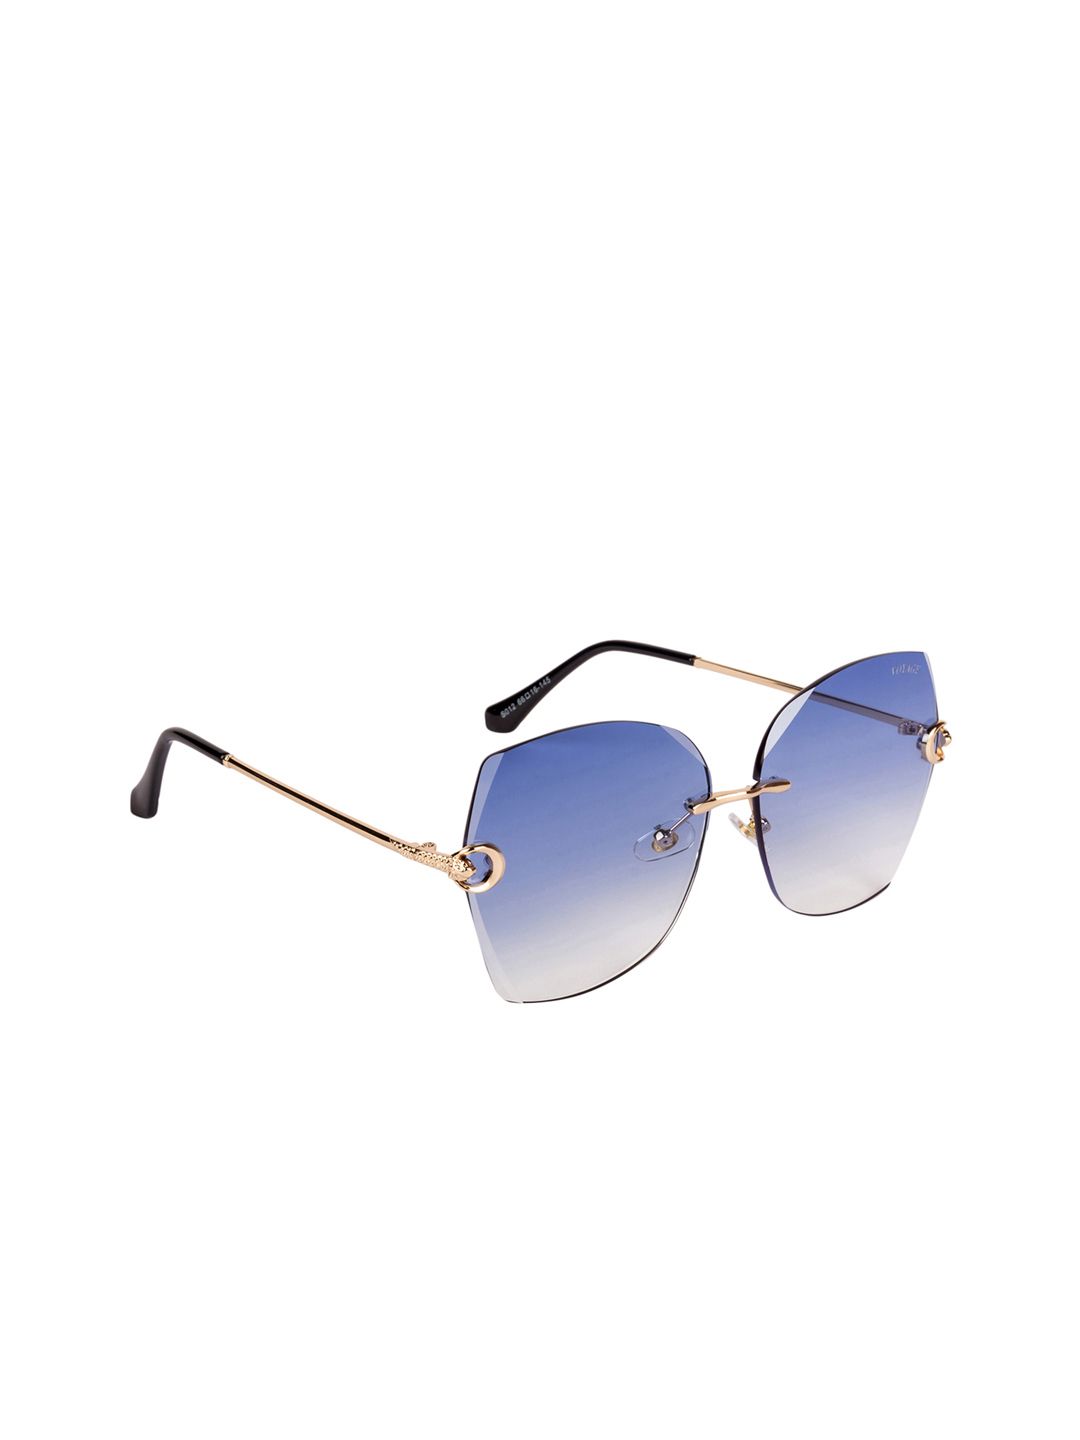 Voyage Women Blue Square Sunglasses S012MG2880 Price in India